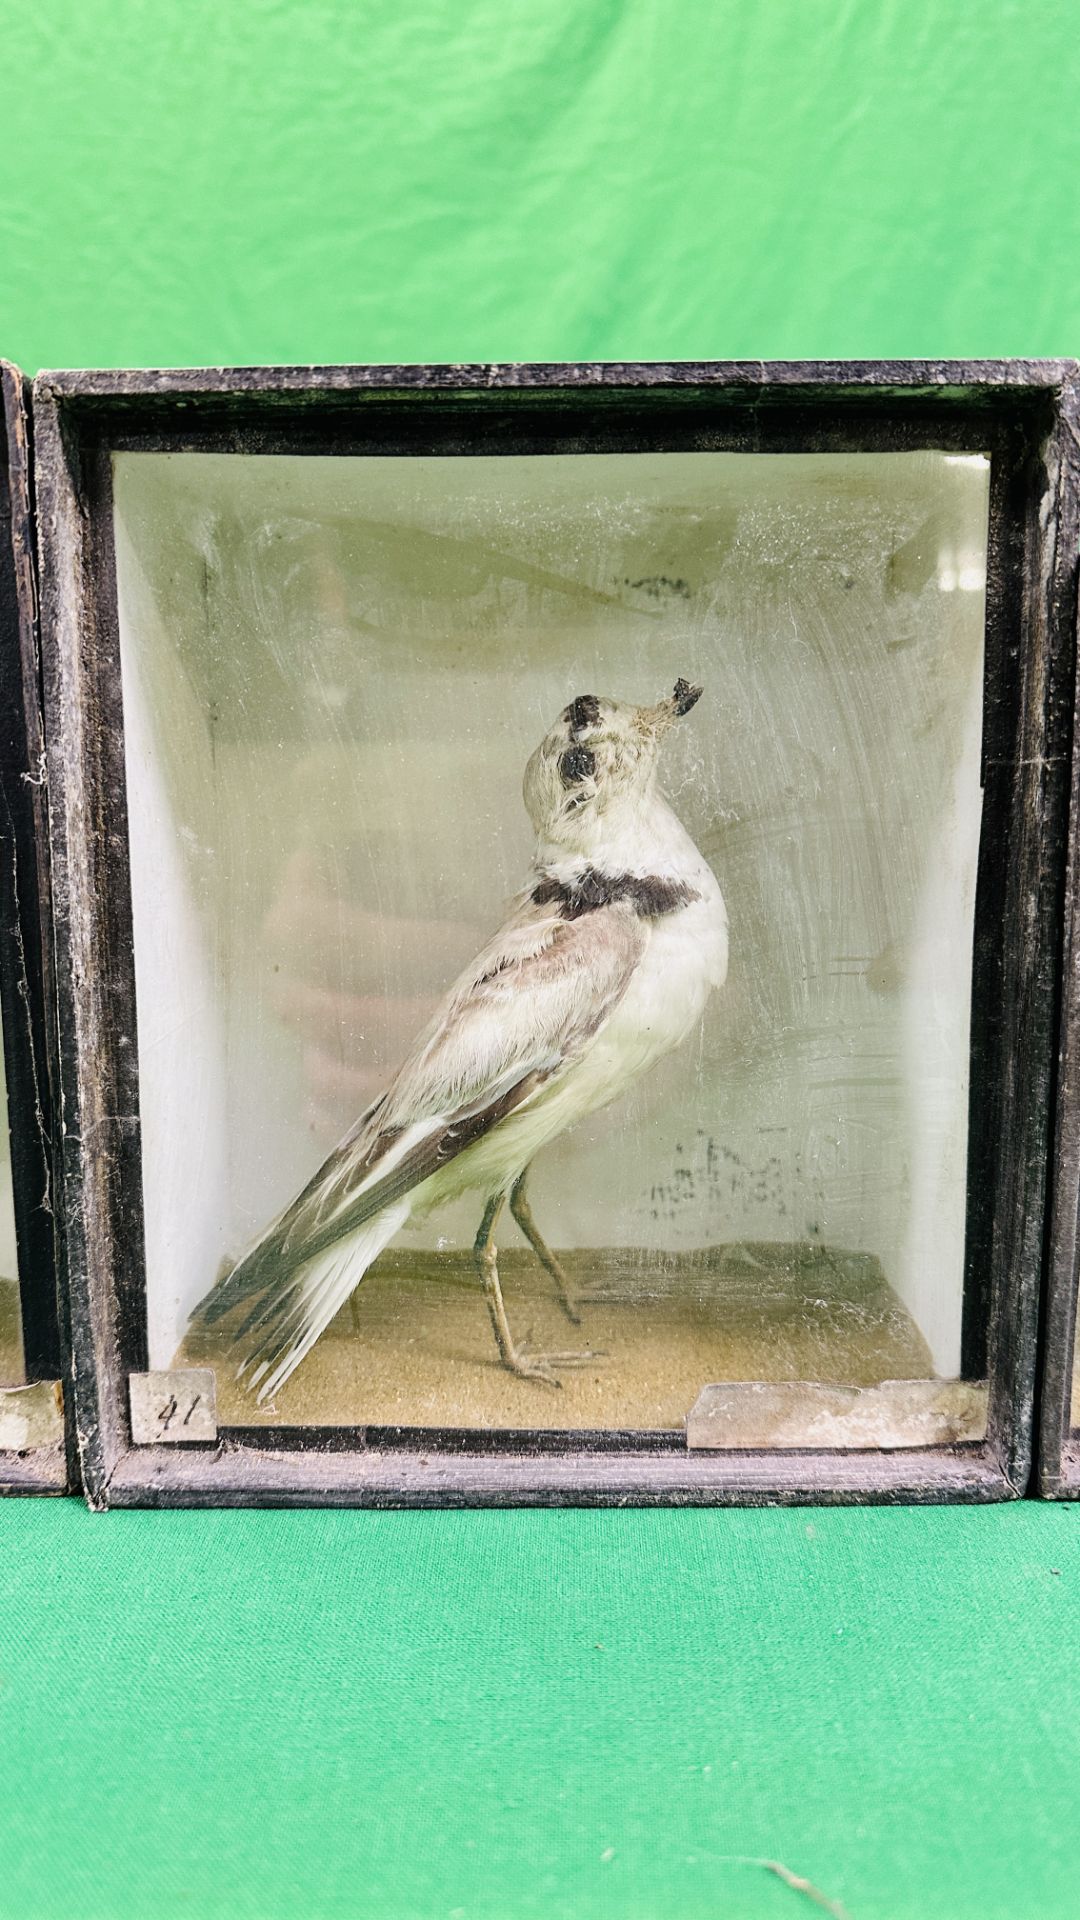 A GROUP OF 3 VICTORIAN CASED TAXIDERMY STUDIES OF WADING BIRDS TO INCLUDE A RINGED PLOVER EXAMPLE - - Image 3 of 5